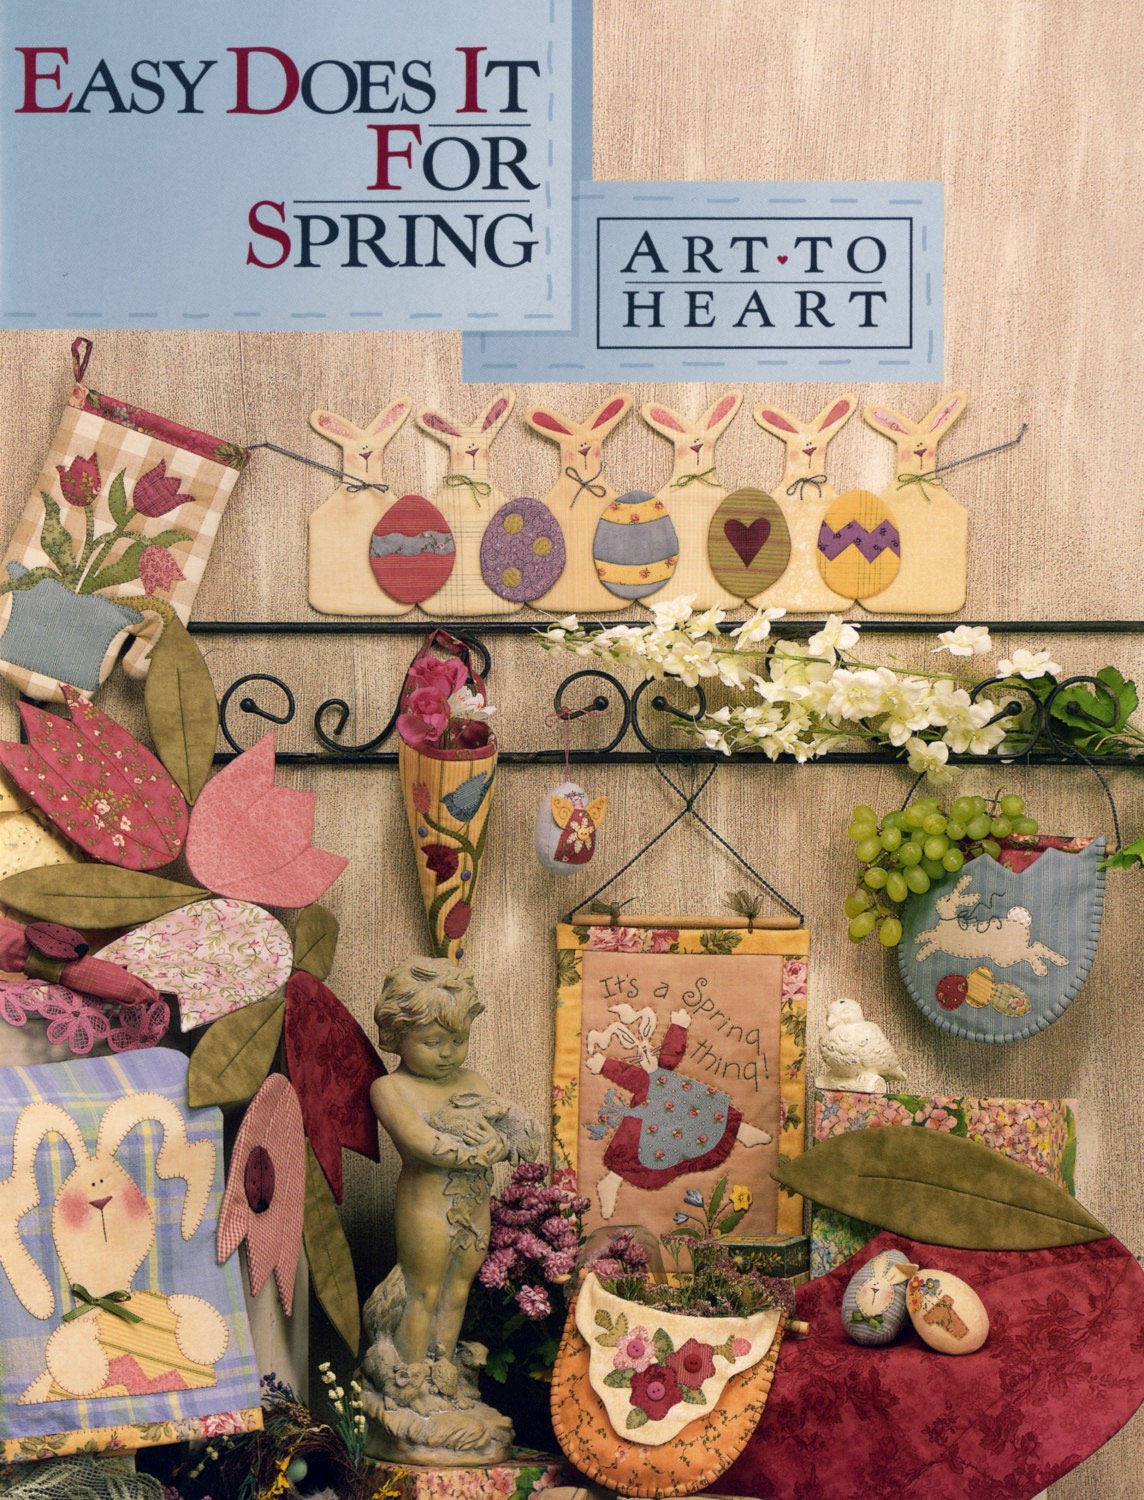 Easy-Does-It-For-Spring-sewing-pattern-book-Art-To-Heart-front